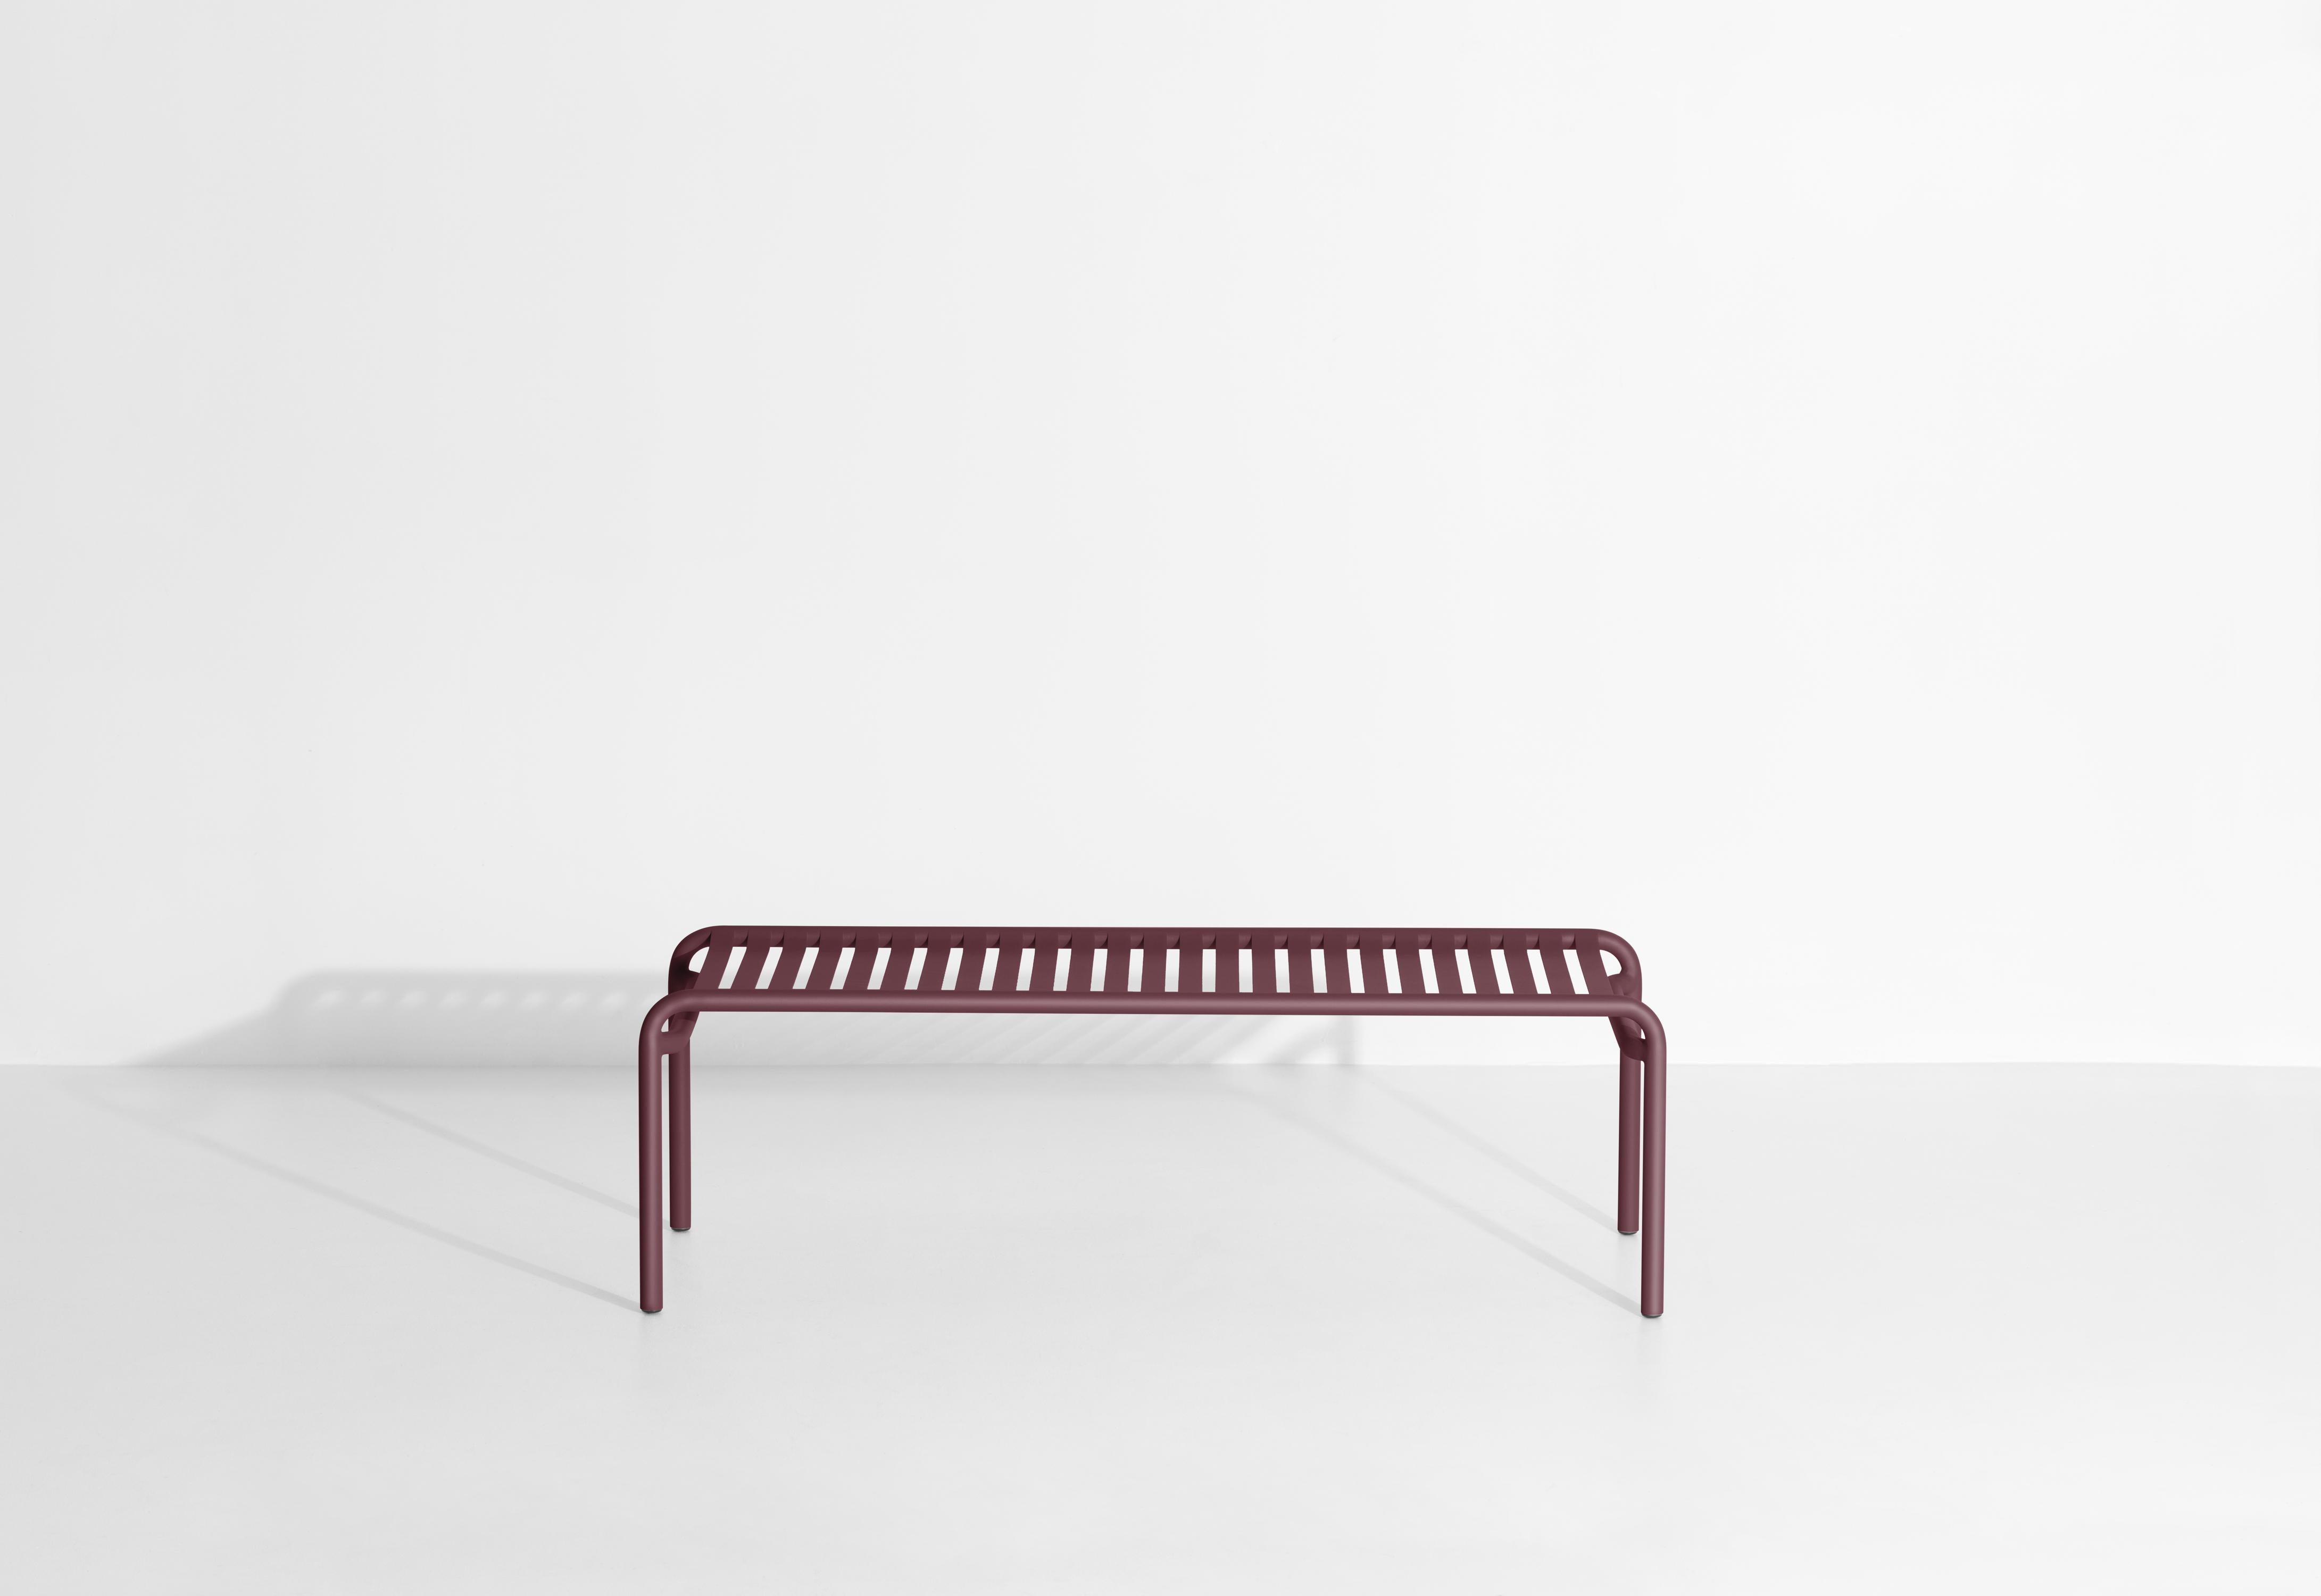 Chinese Petite Friture Week-End Long Coffee Table in Burgundy Aluminium, 2017  For Sale